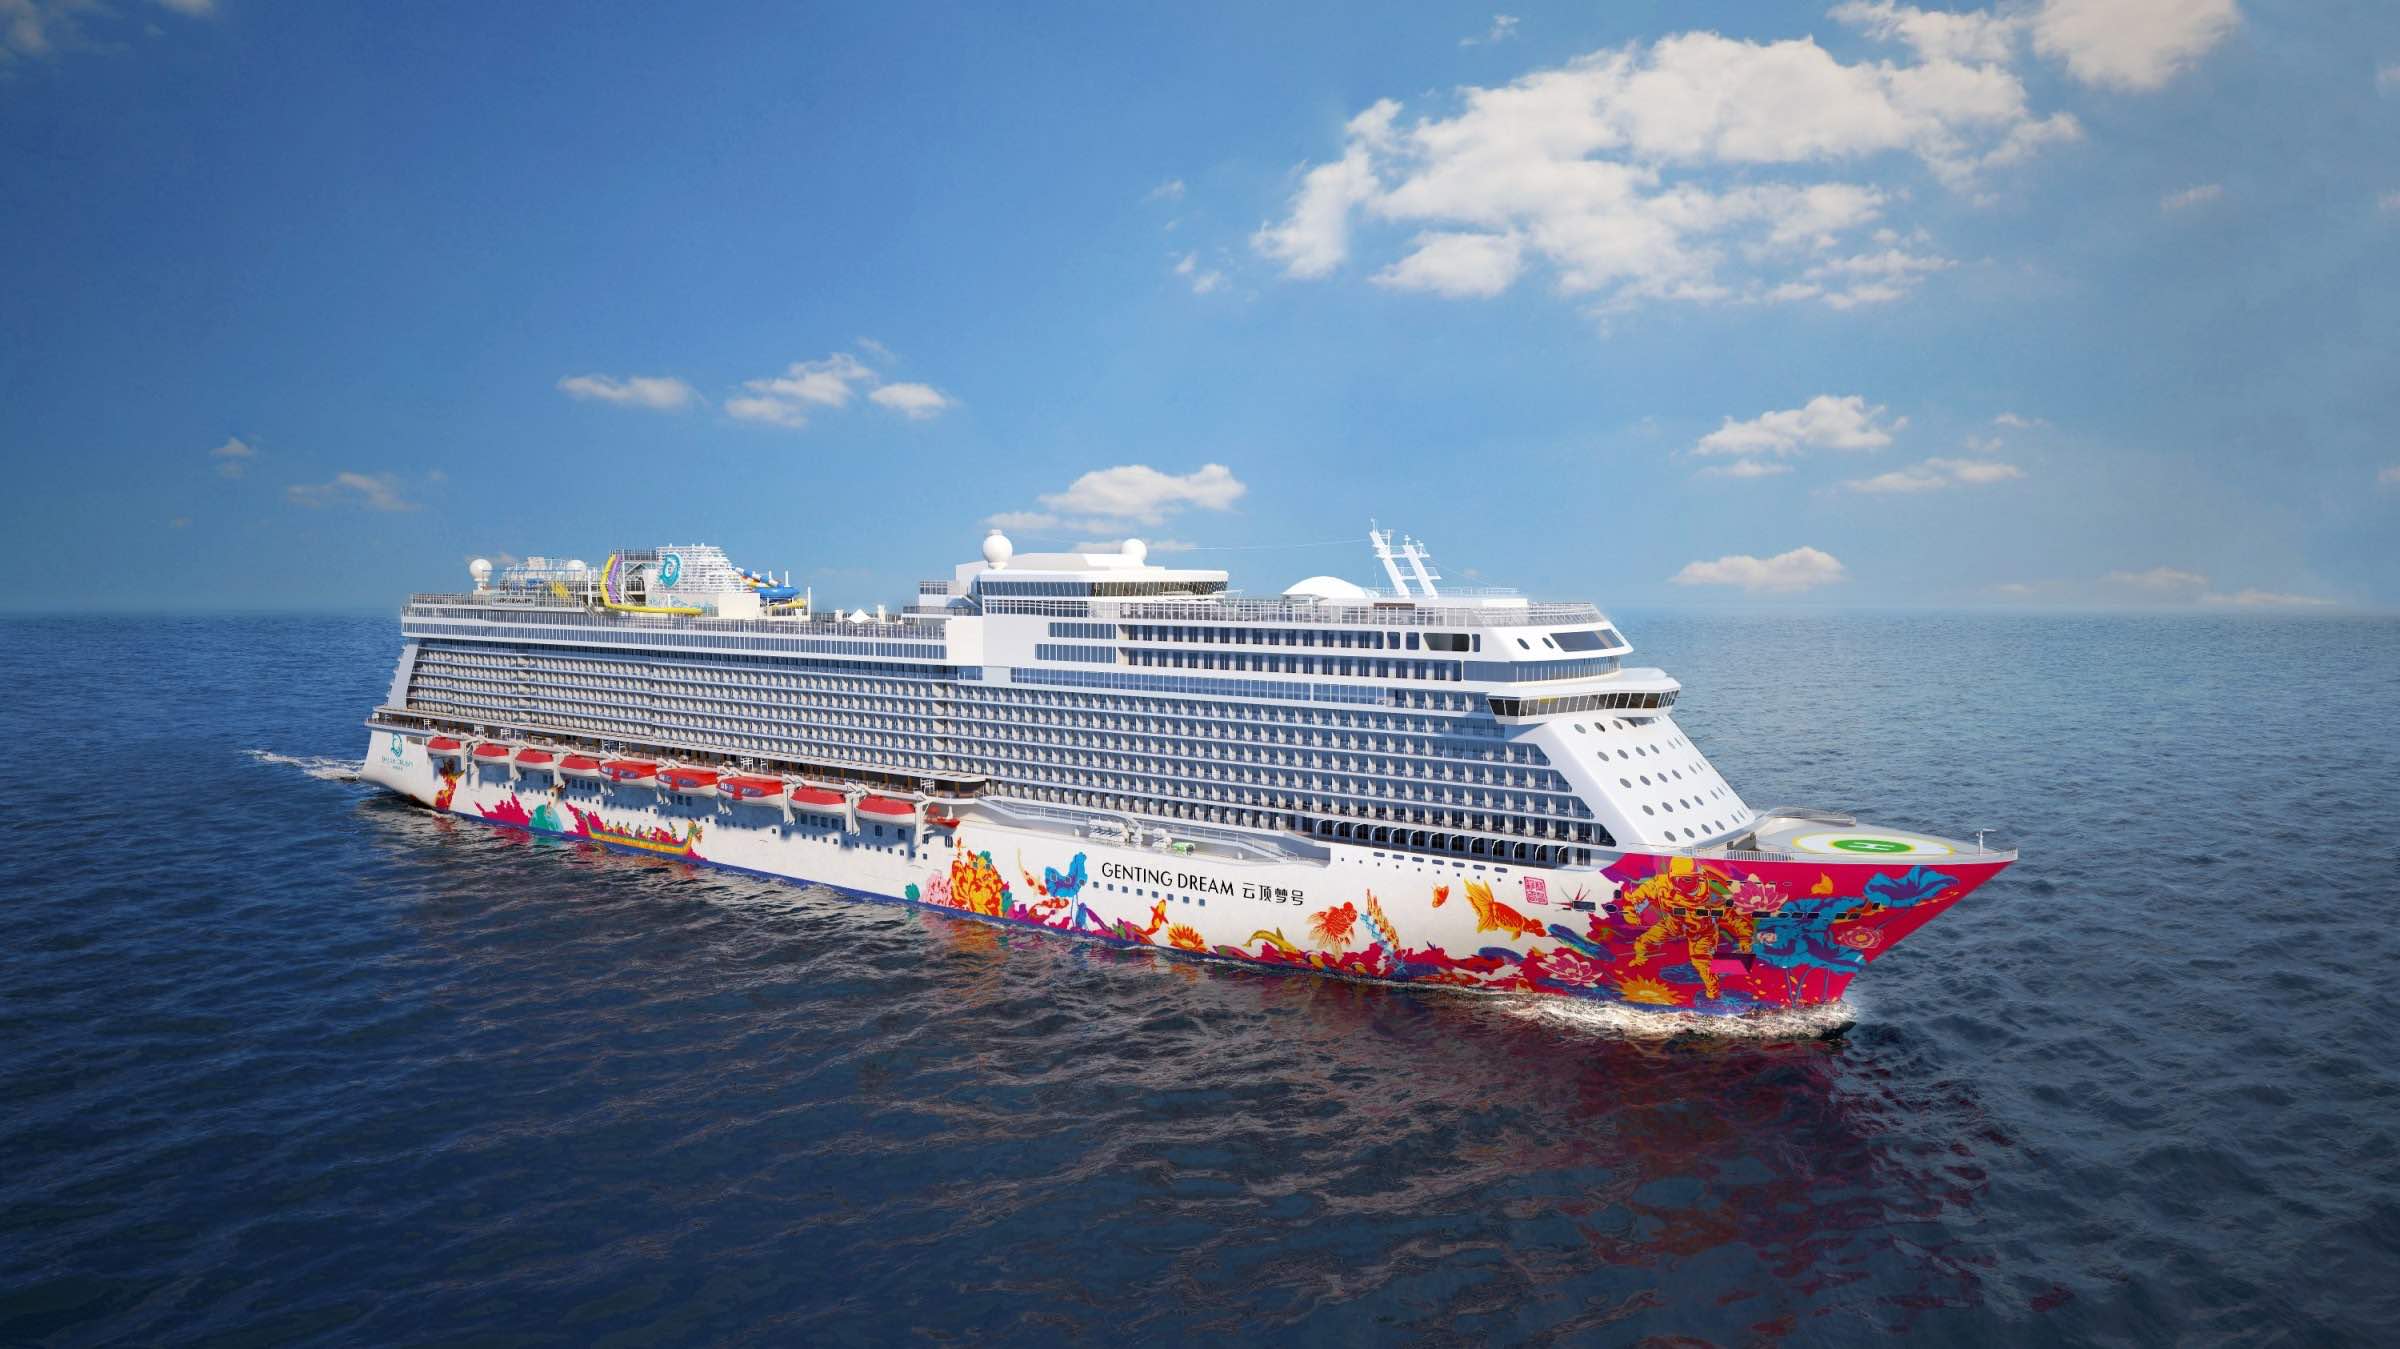 Resorts World Cruises to debut in Singapore with Genting Dream on June